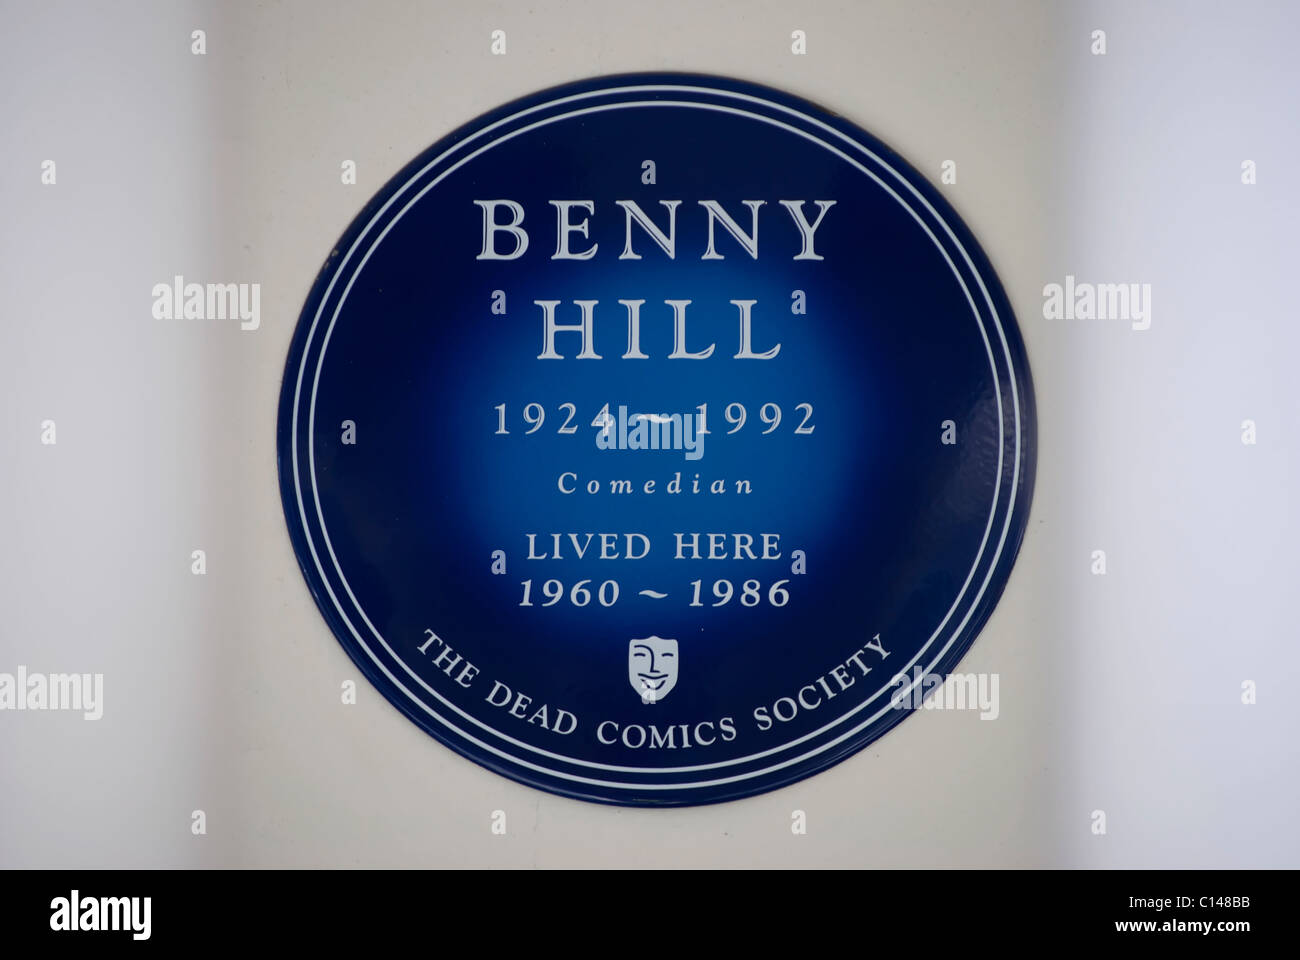 dead comics society blue plaque marking a home of comedian benny hill, in queen's gate, london, england Stock Photo